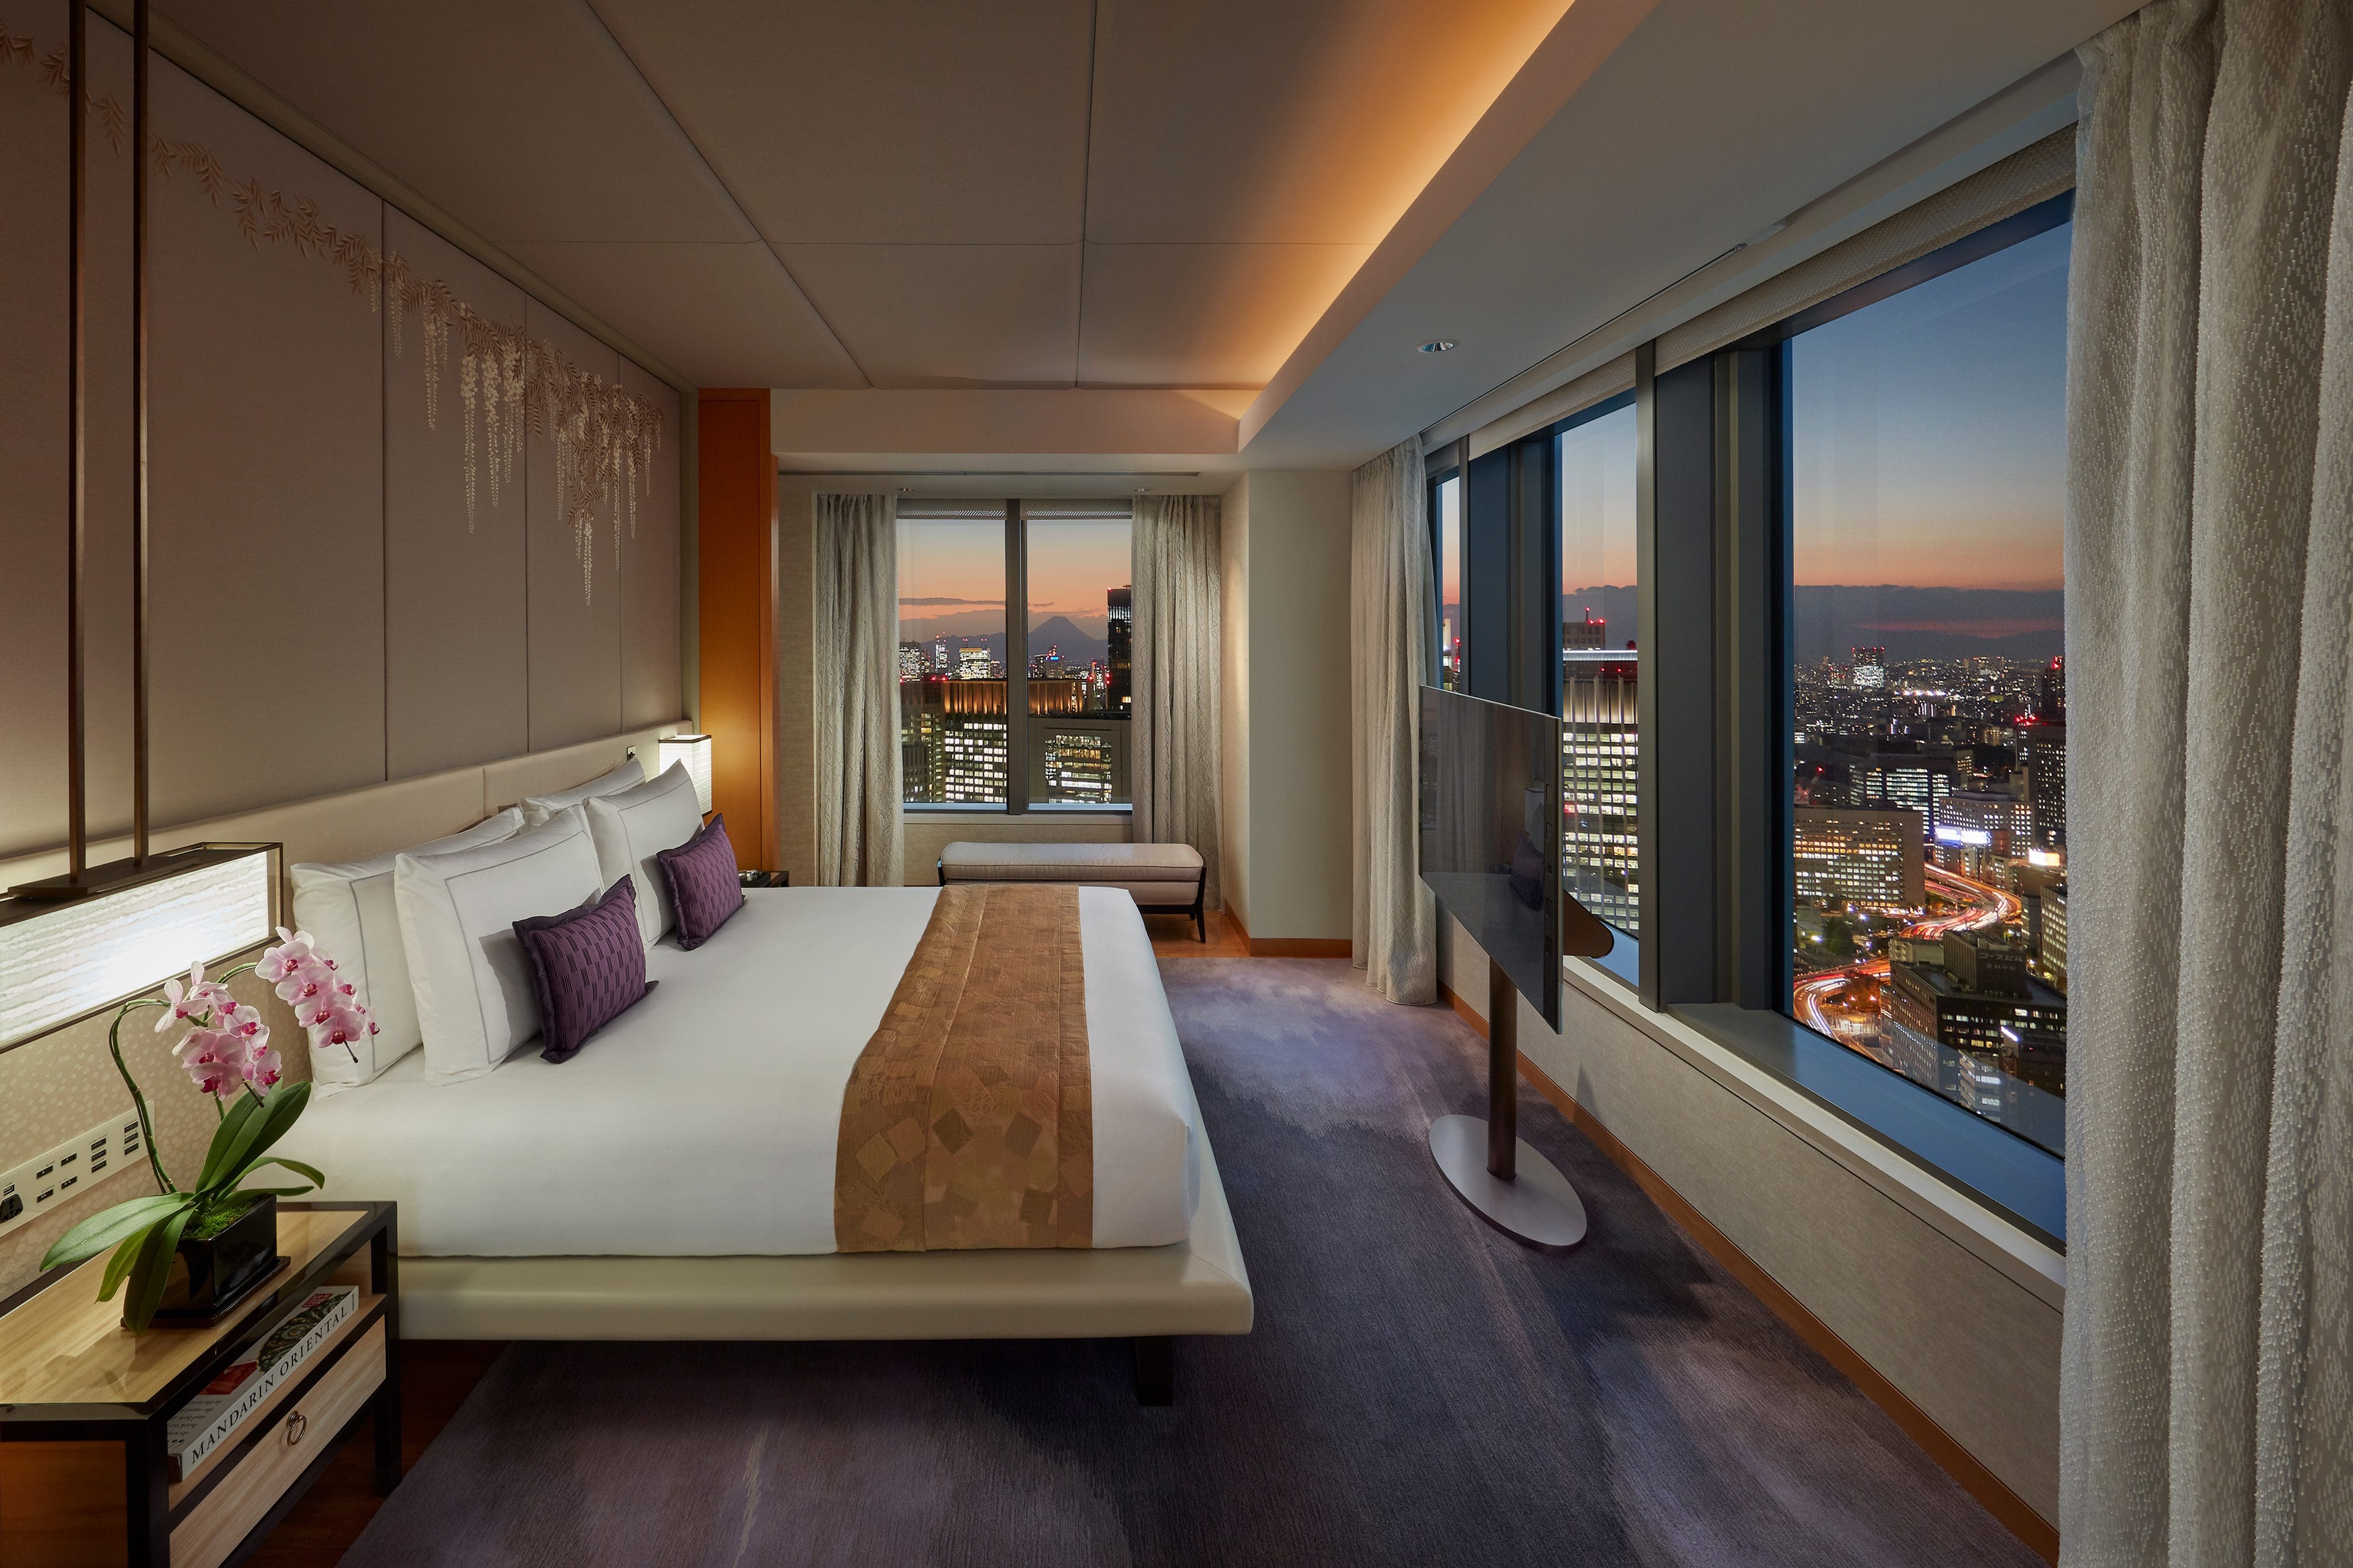 Inside the Oriental bedroom at MO Tokyo with its views of the city skyline